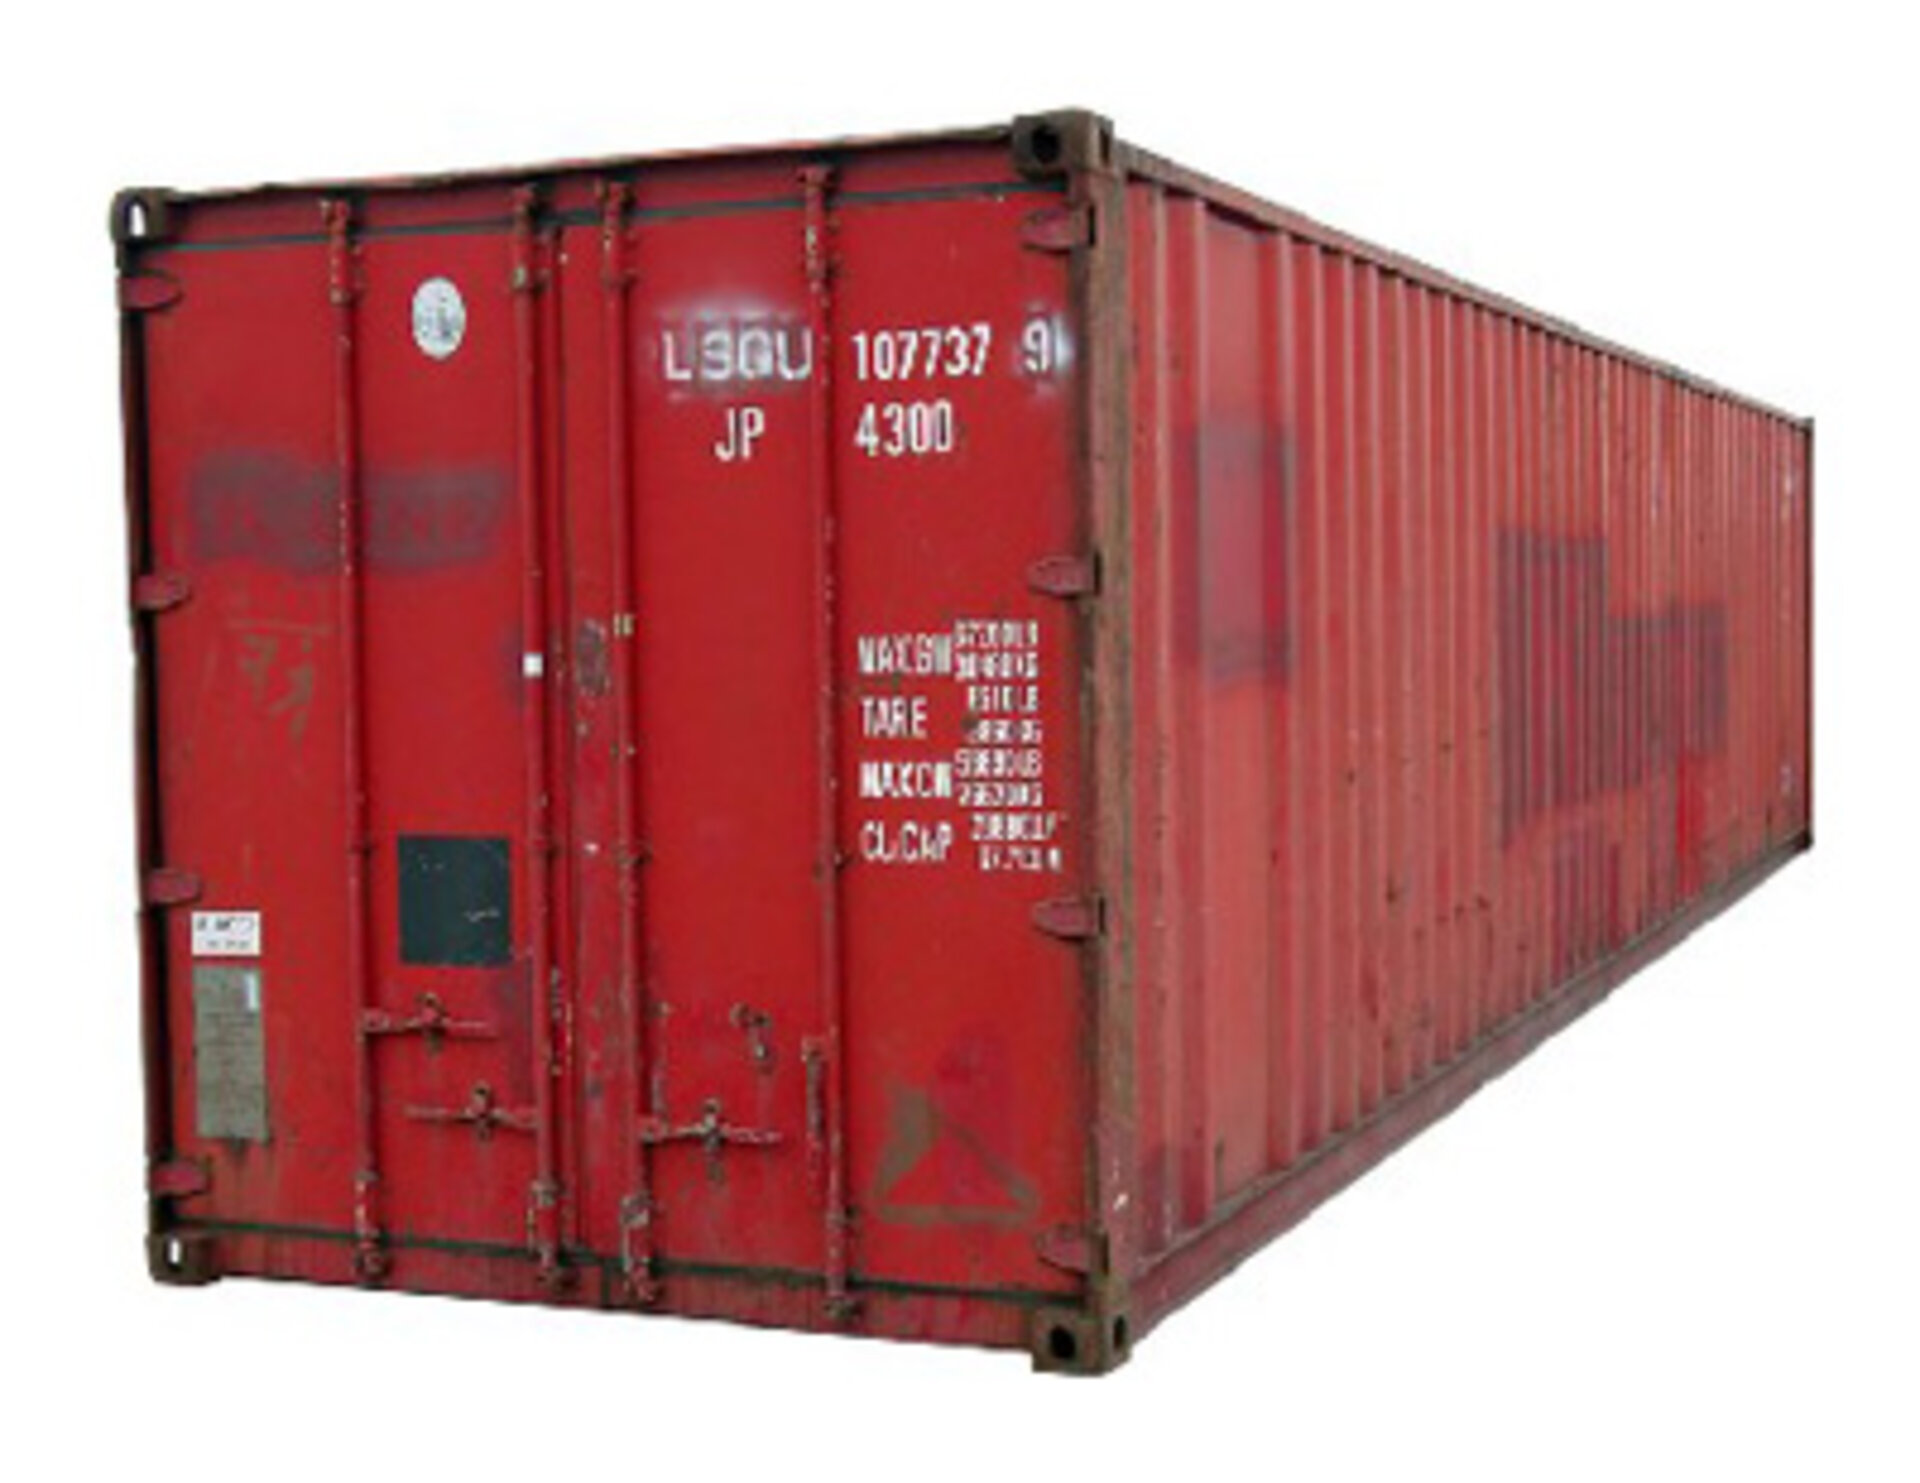 Standard container